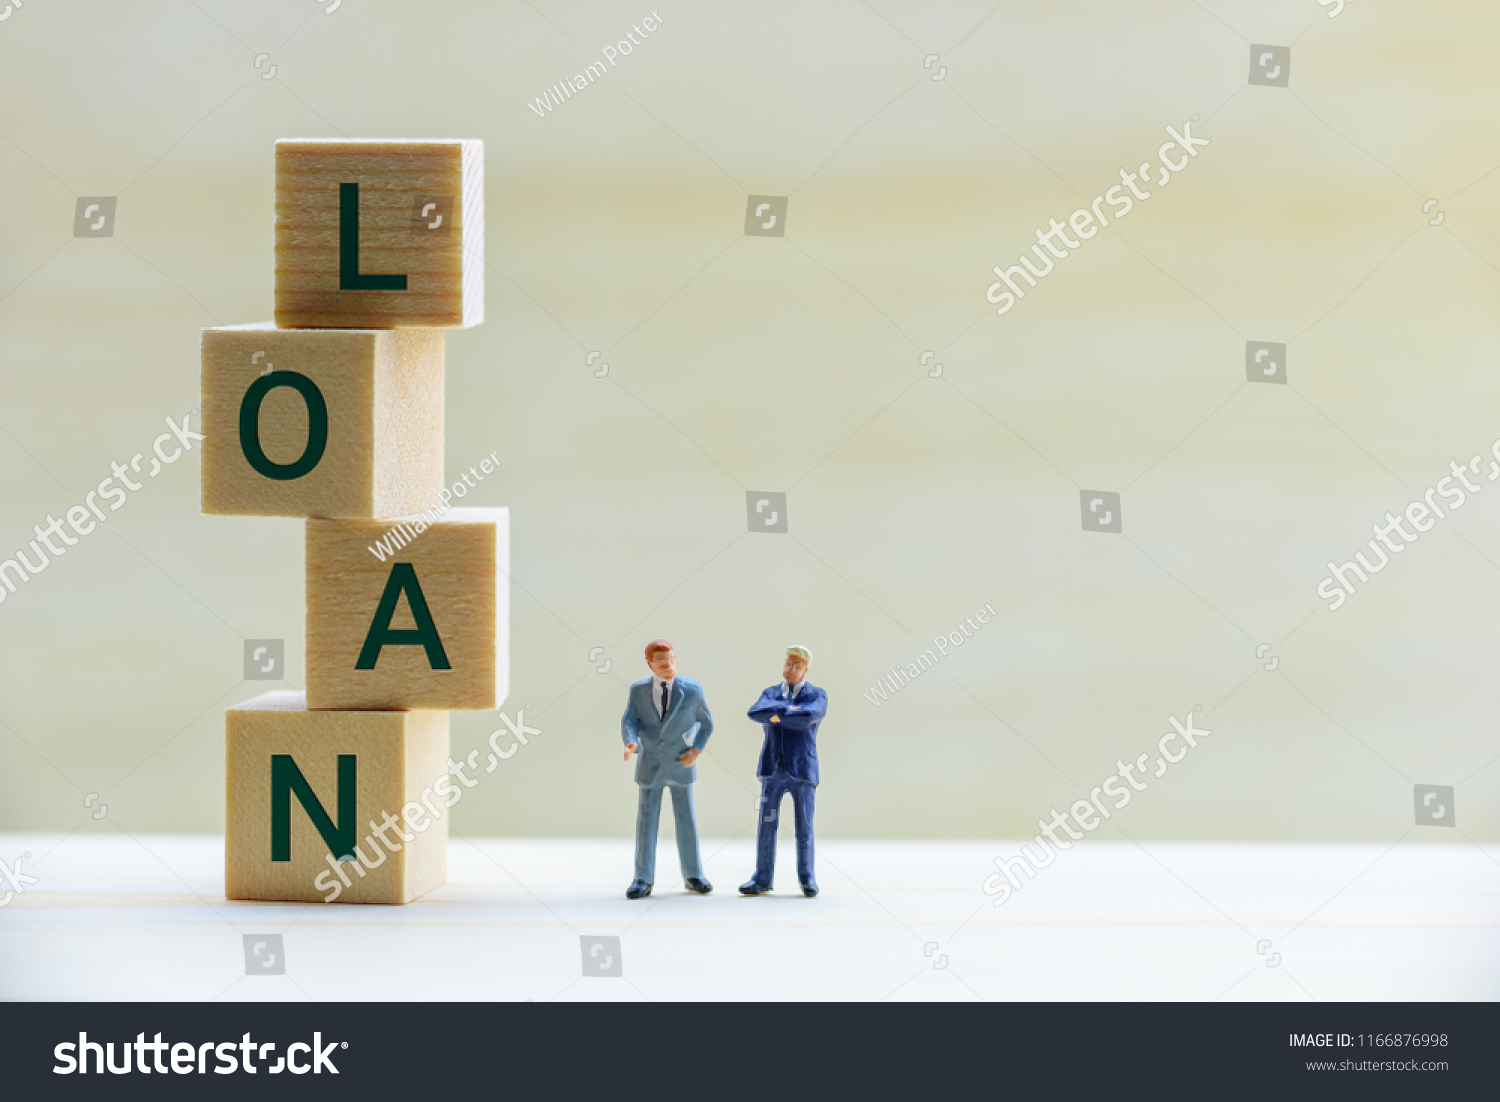 Financial loan negotiation / discussion among a lender and borrower concept : Miniature figurine two businessmen talk on money loan contract agreement, discuss about a company credit and loan profile #1166876998